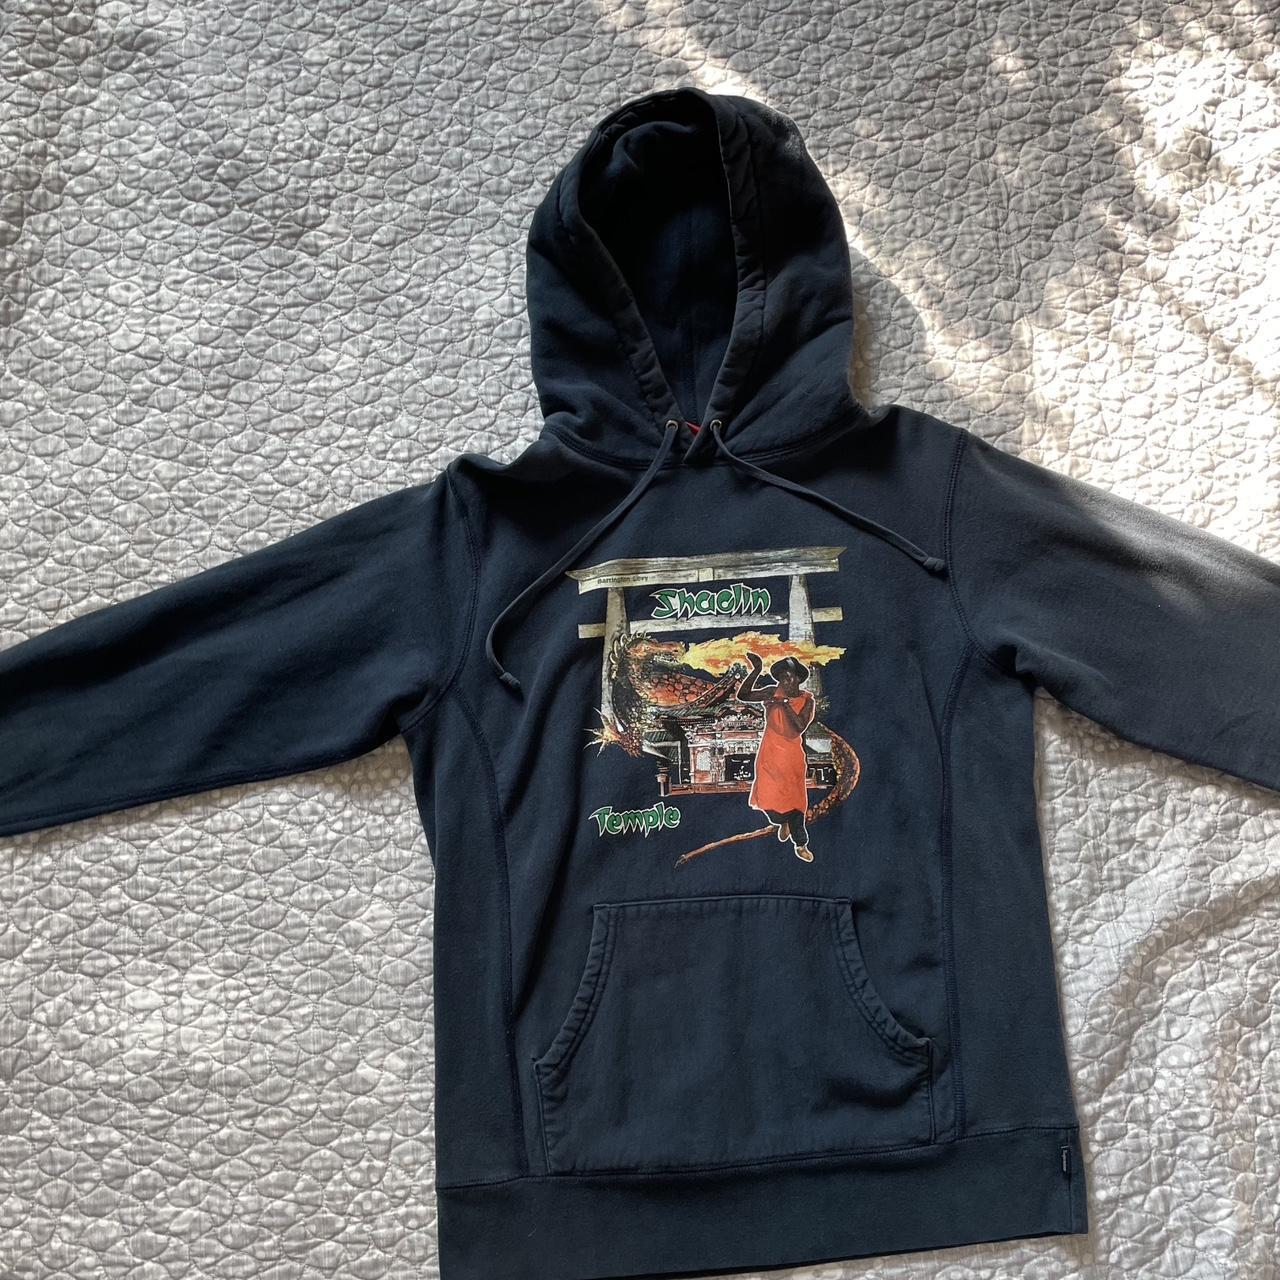 Tyler The Creator hoodie colab with Supreme. Size M.